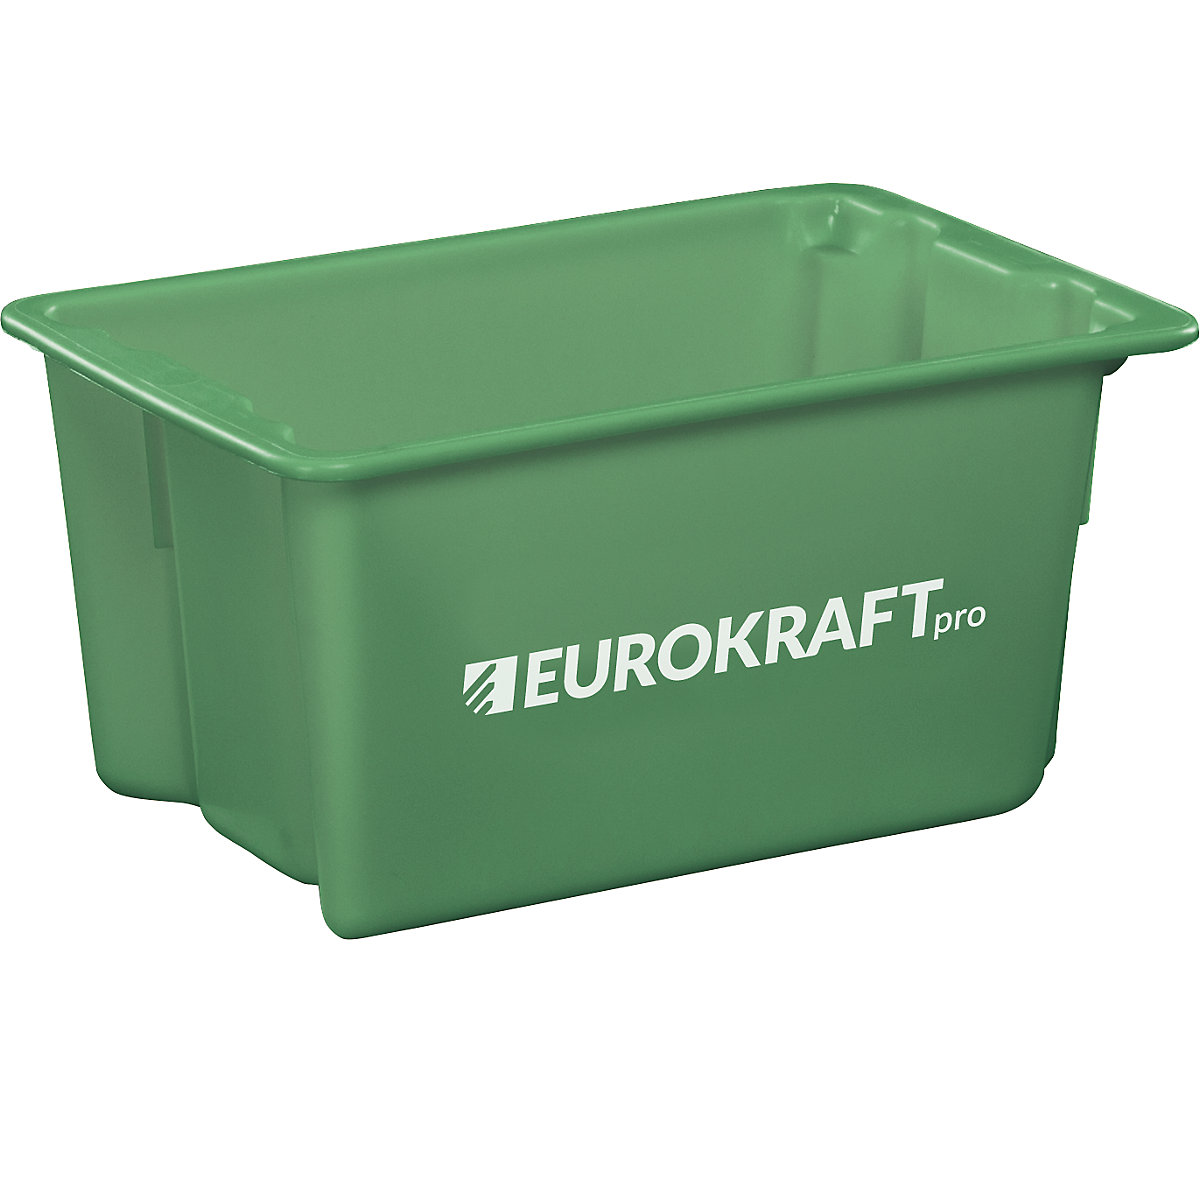 EUROKRAFTpro – Stack/nest container made of polypropylene suitable for foodstuffs, 50 l capacity, pack of 3, solid walls and base, green